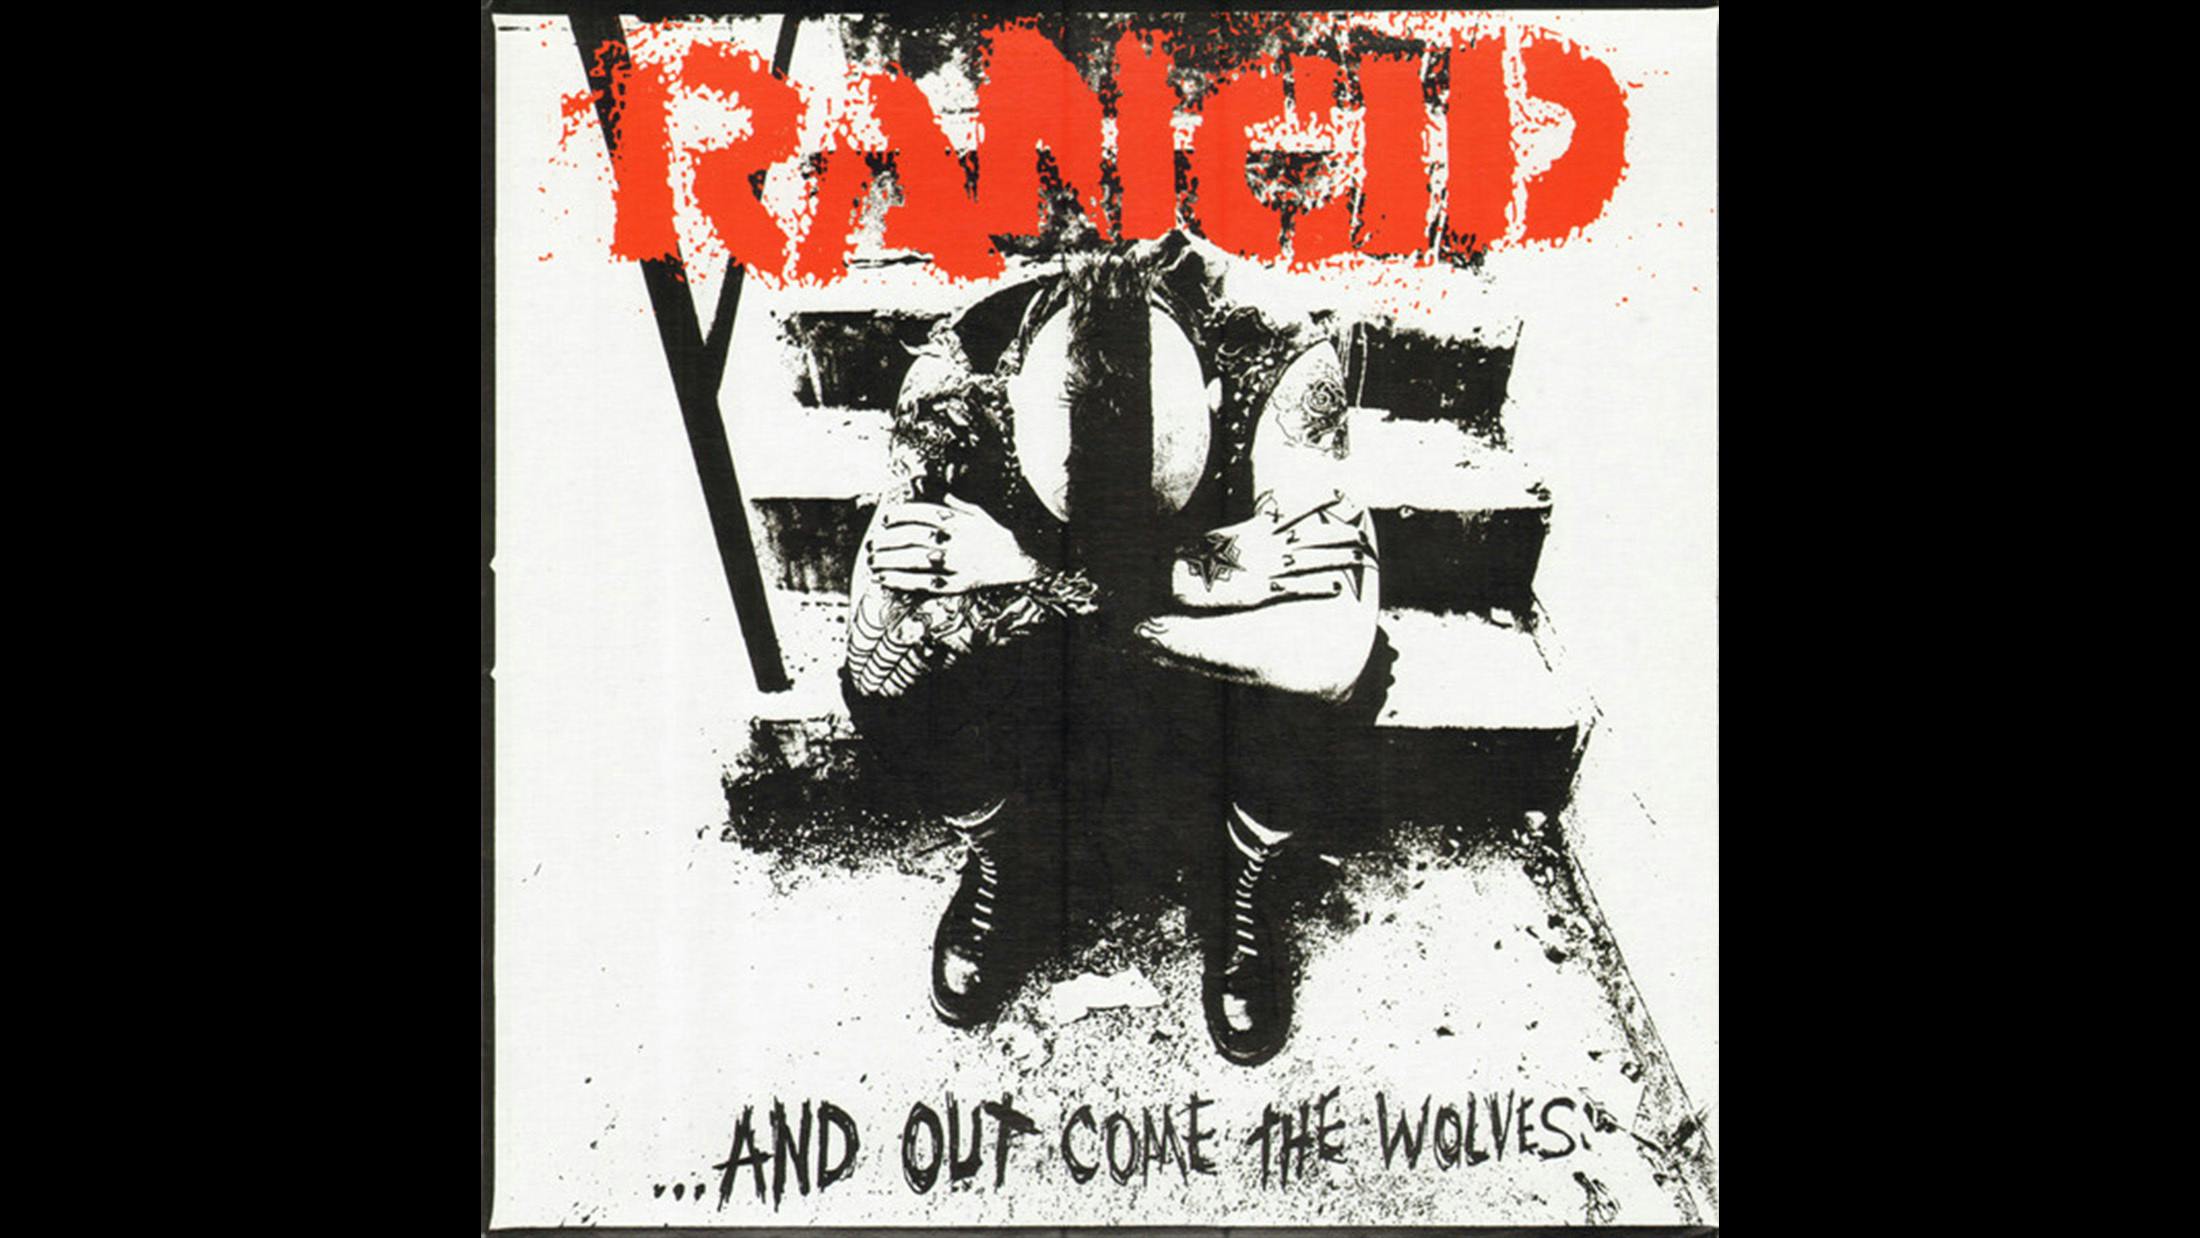 During the mid-’90s punk explosion, Green Day and The Offspring savoured the commercial success, but Rancid cornered the punk credibility. Taking its title from the major-label feeding frenzy surrounding the band, this was as raw as it was infectious.